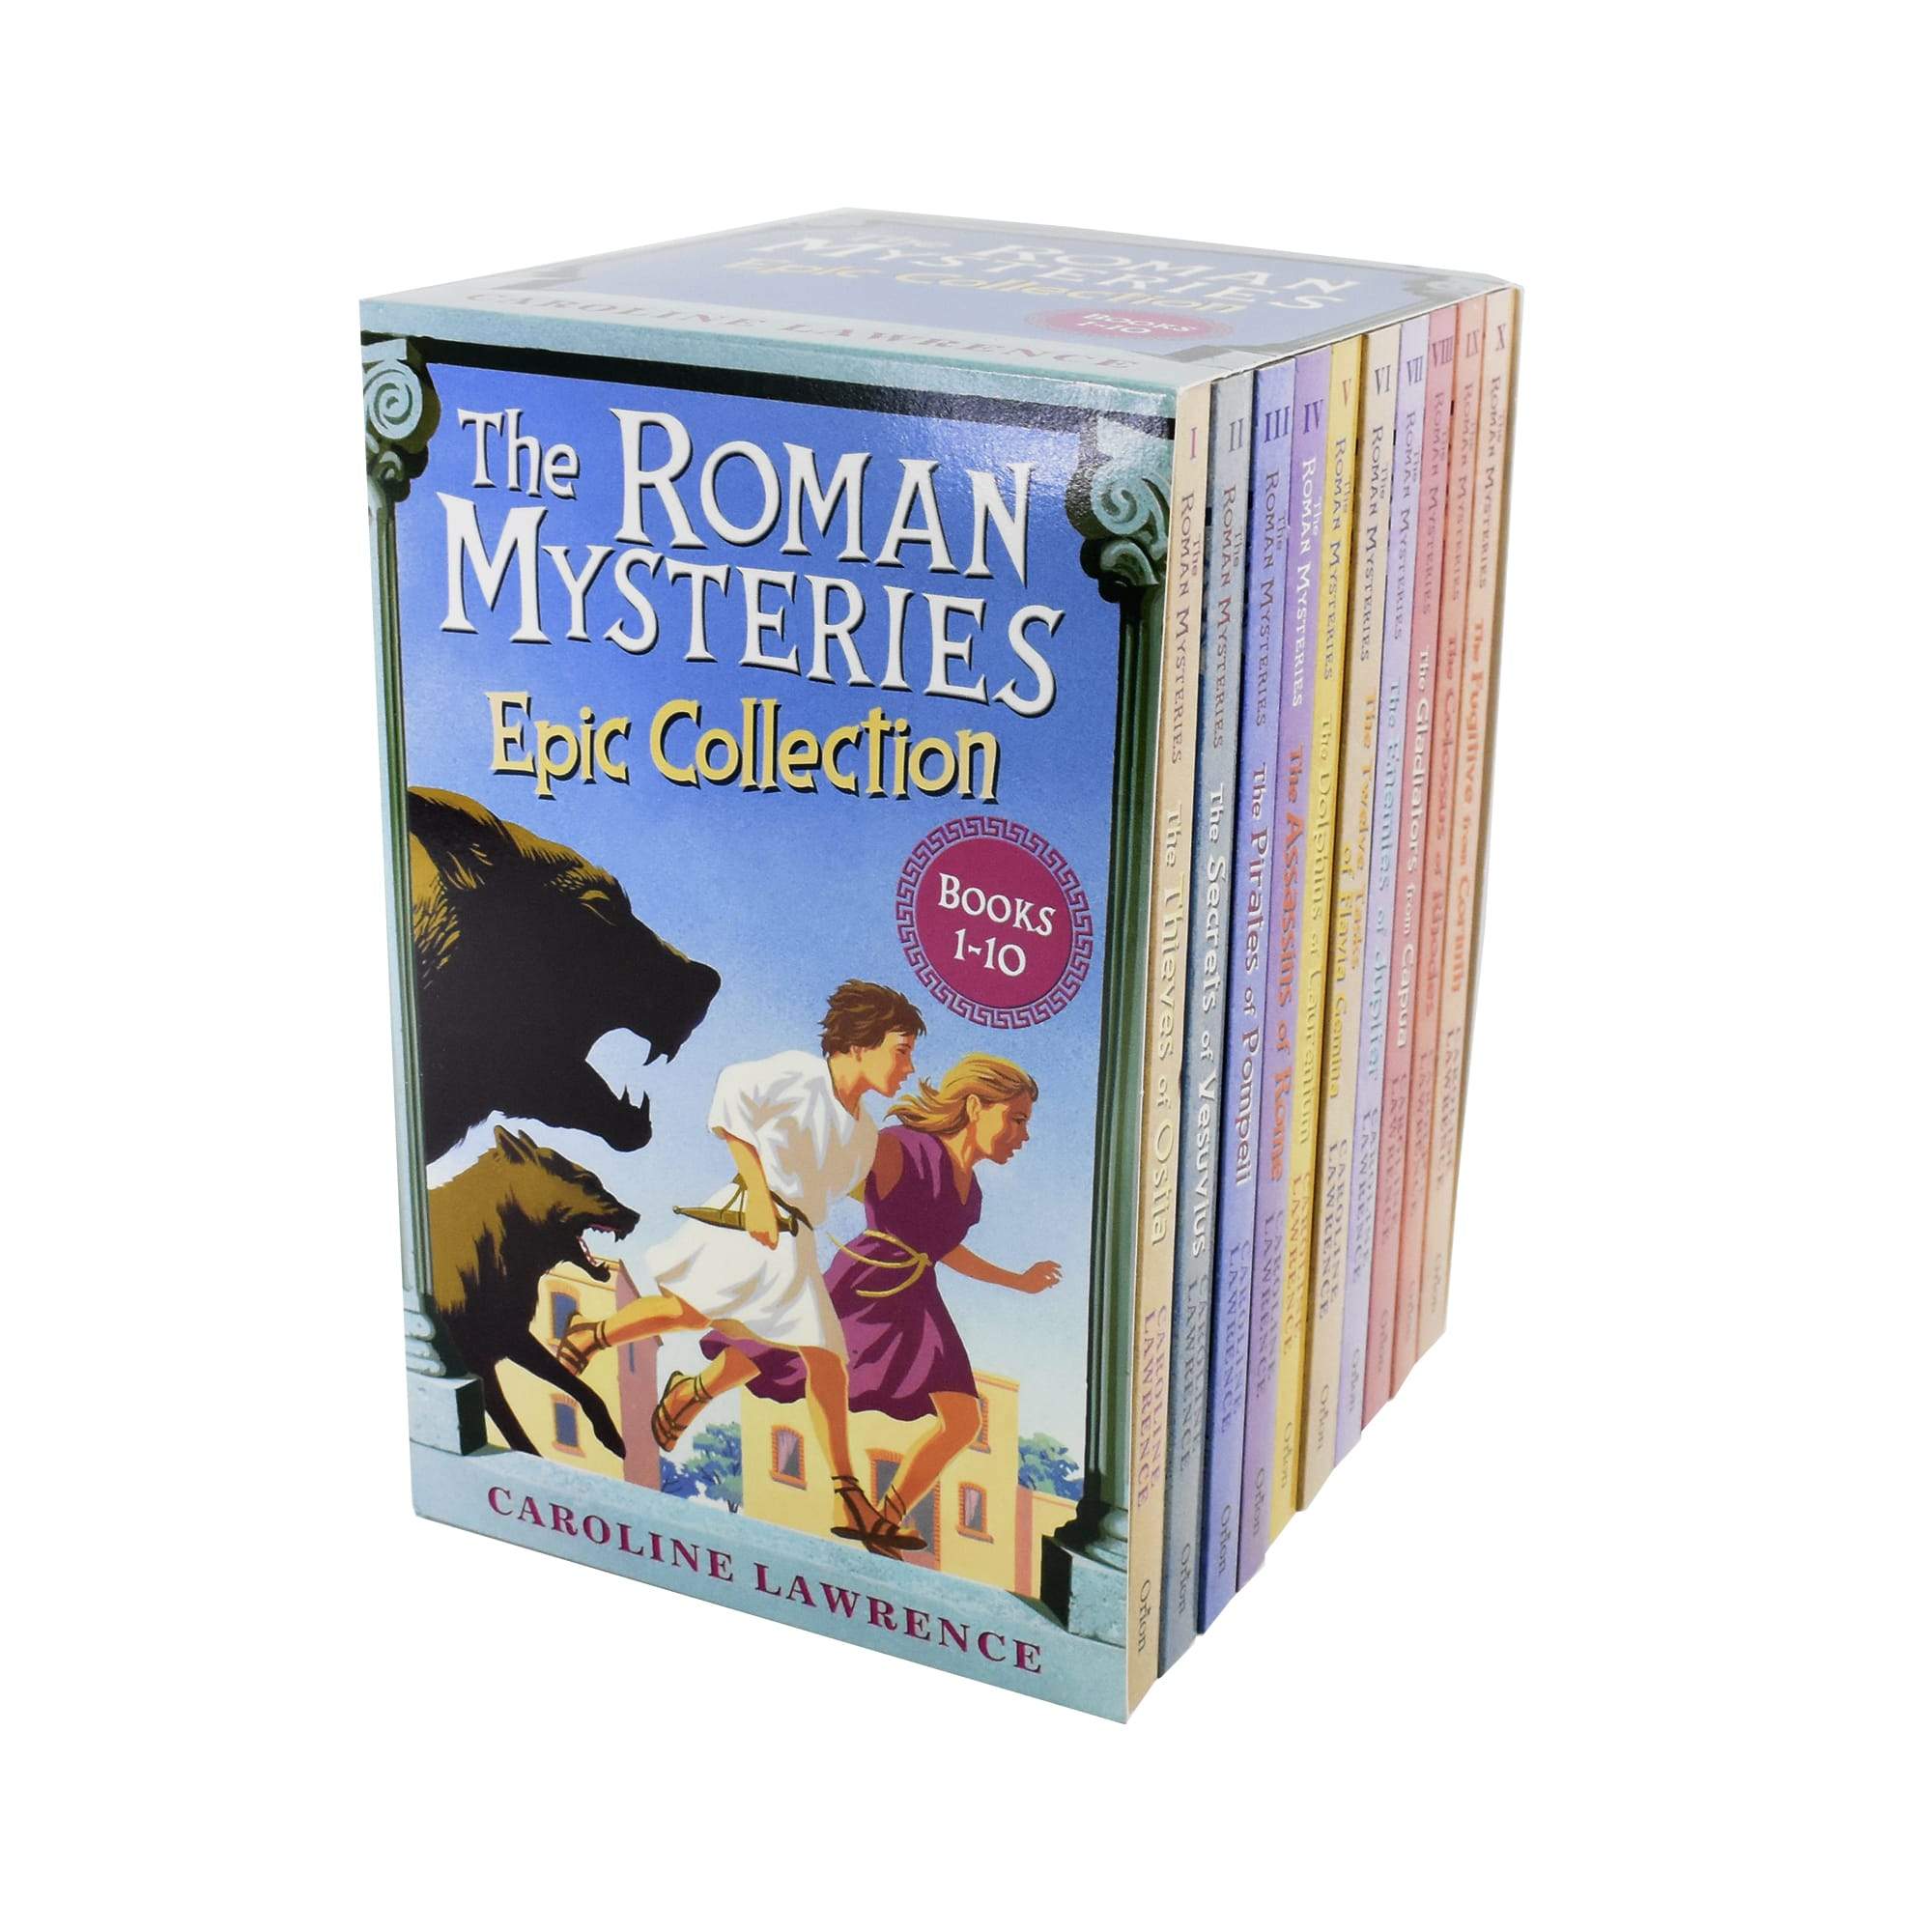 Roman Mysteries Epic 10 Books Children Collection Paperback Set By Caroline Lawrence - St Stephens Books